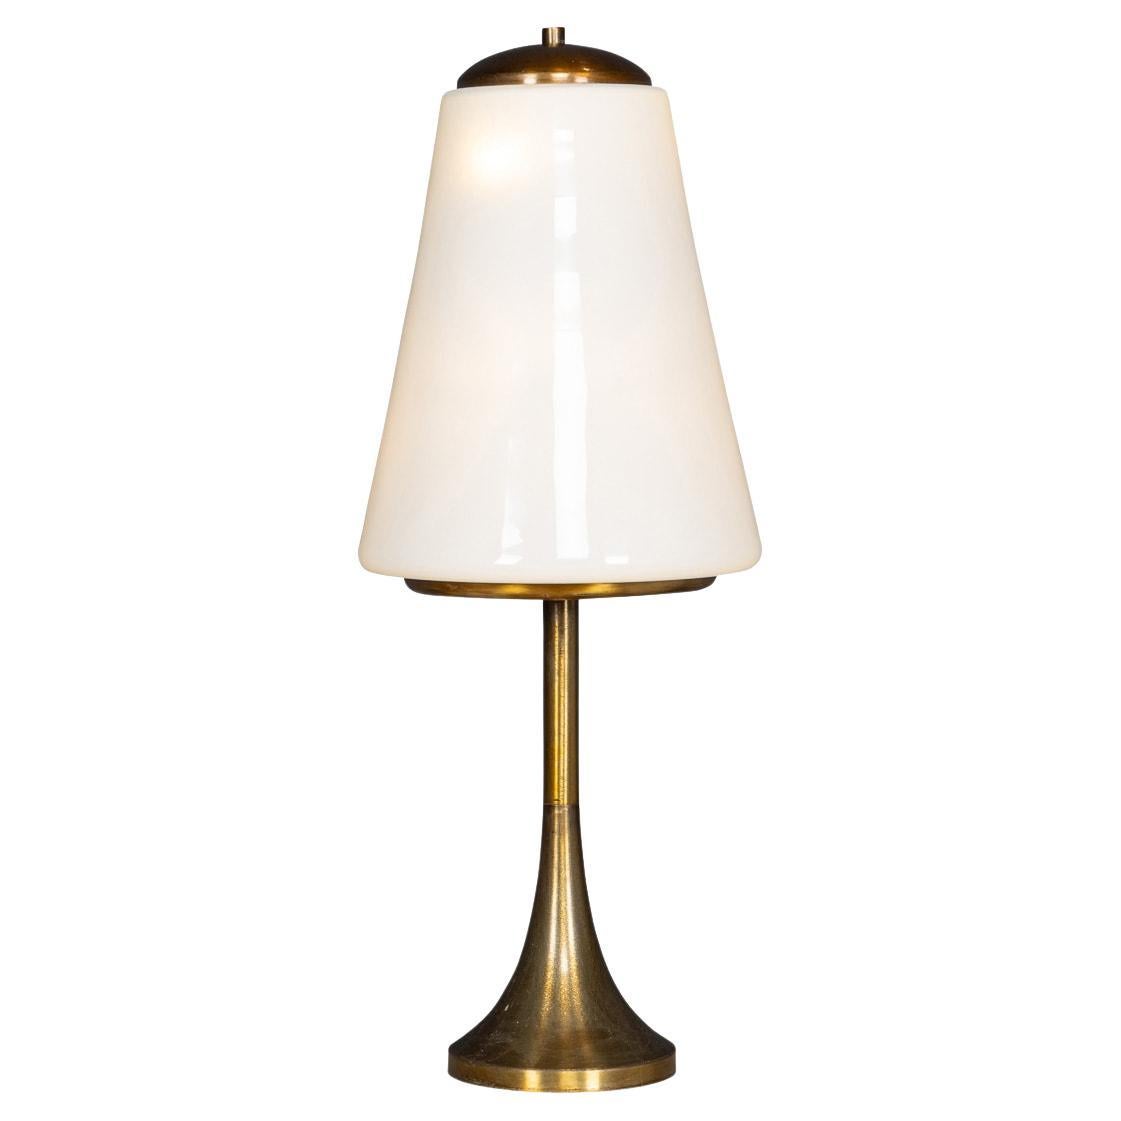 Vintage 20th Century Italian Brass & Opaque White Glass Lamp c.1970 For Sale